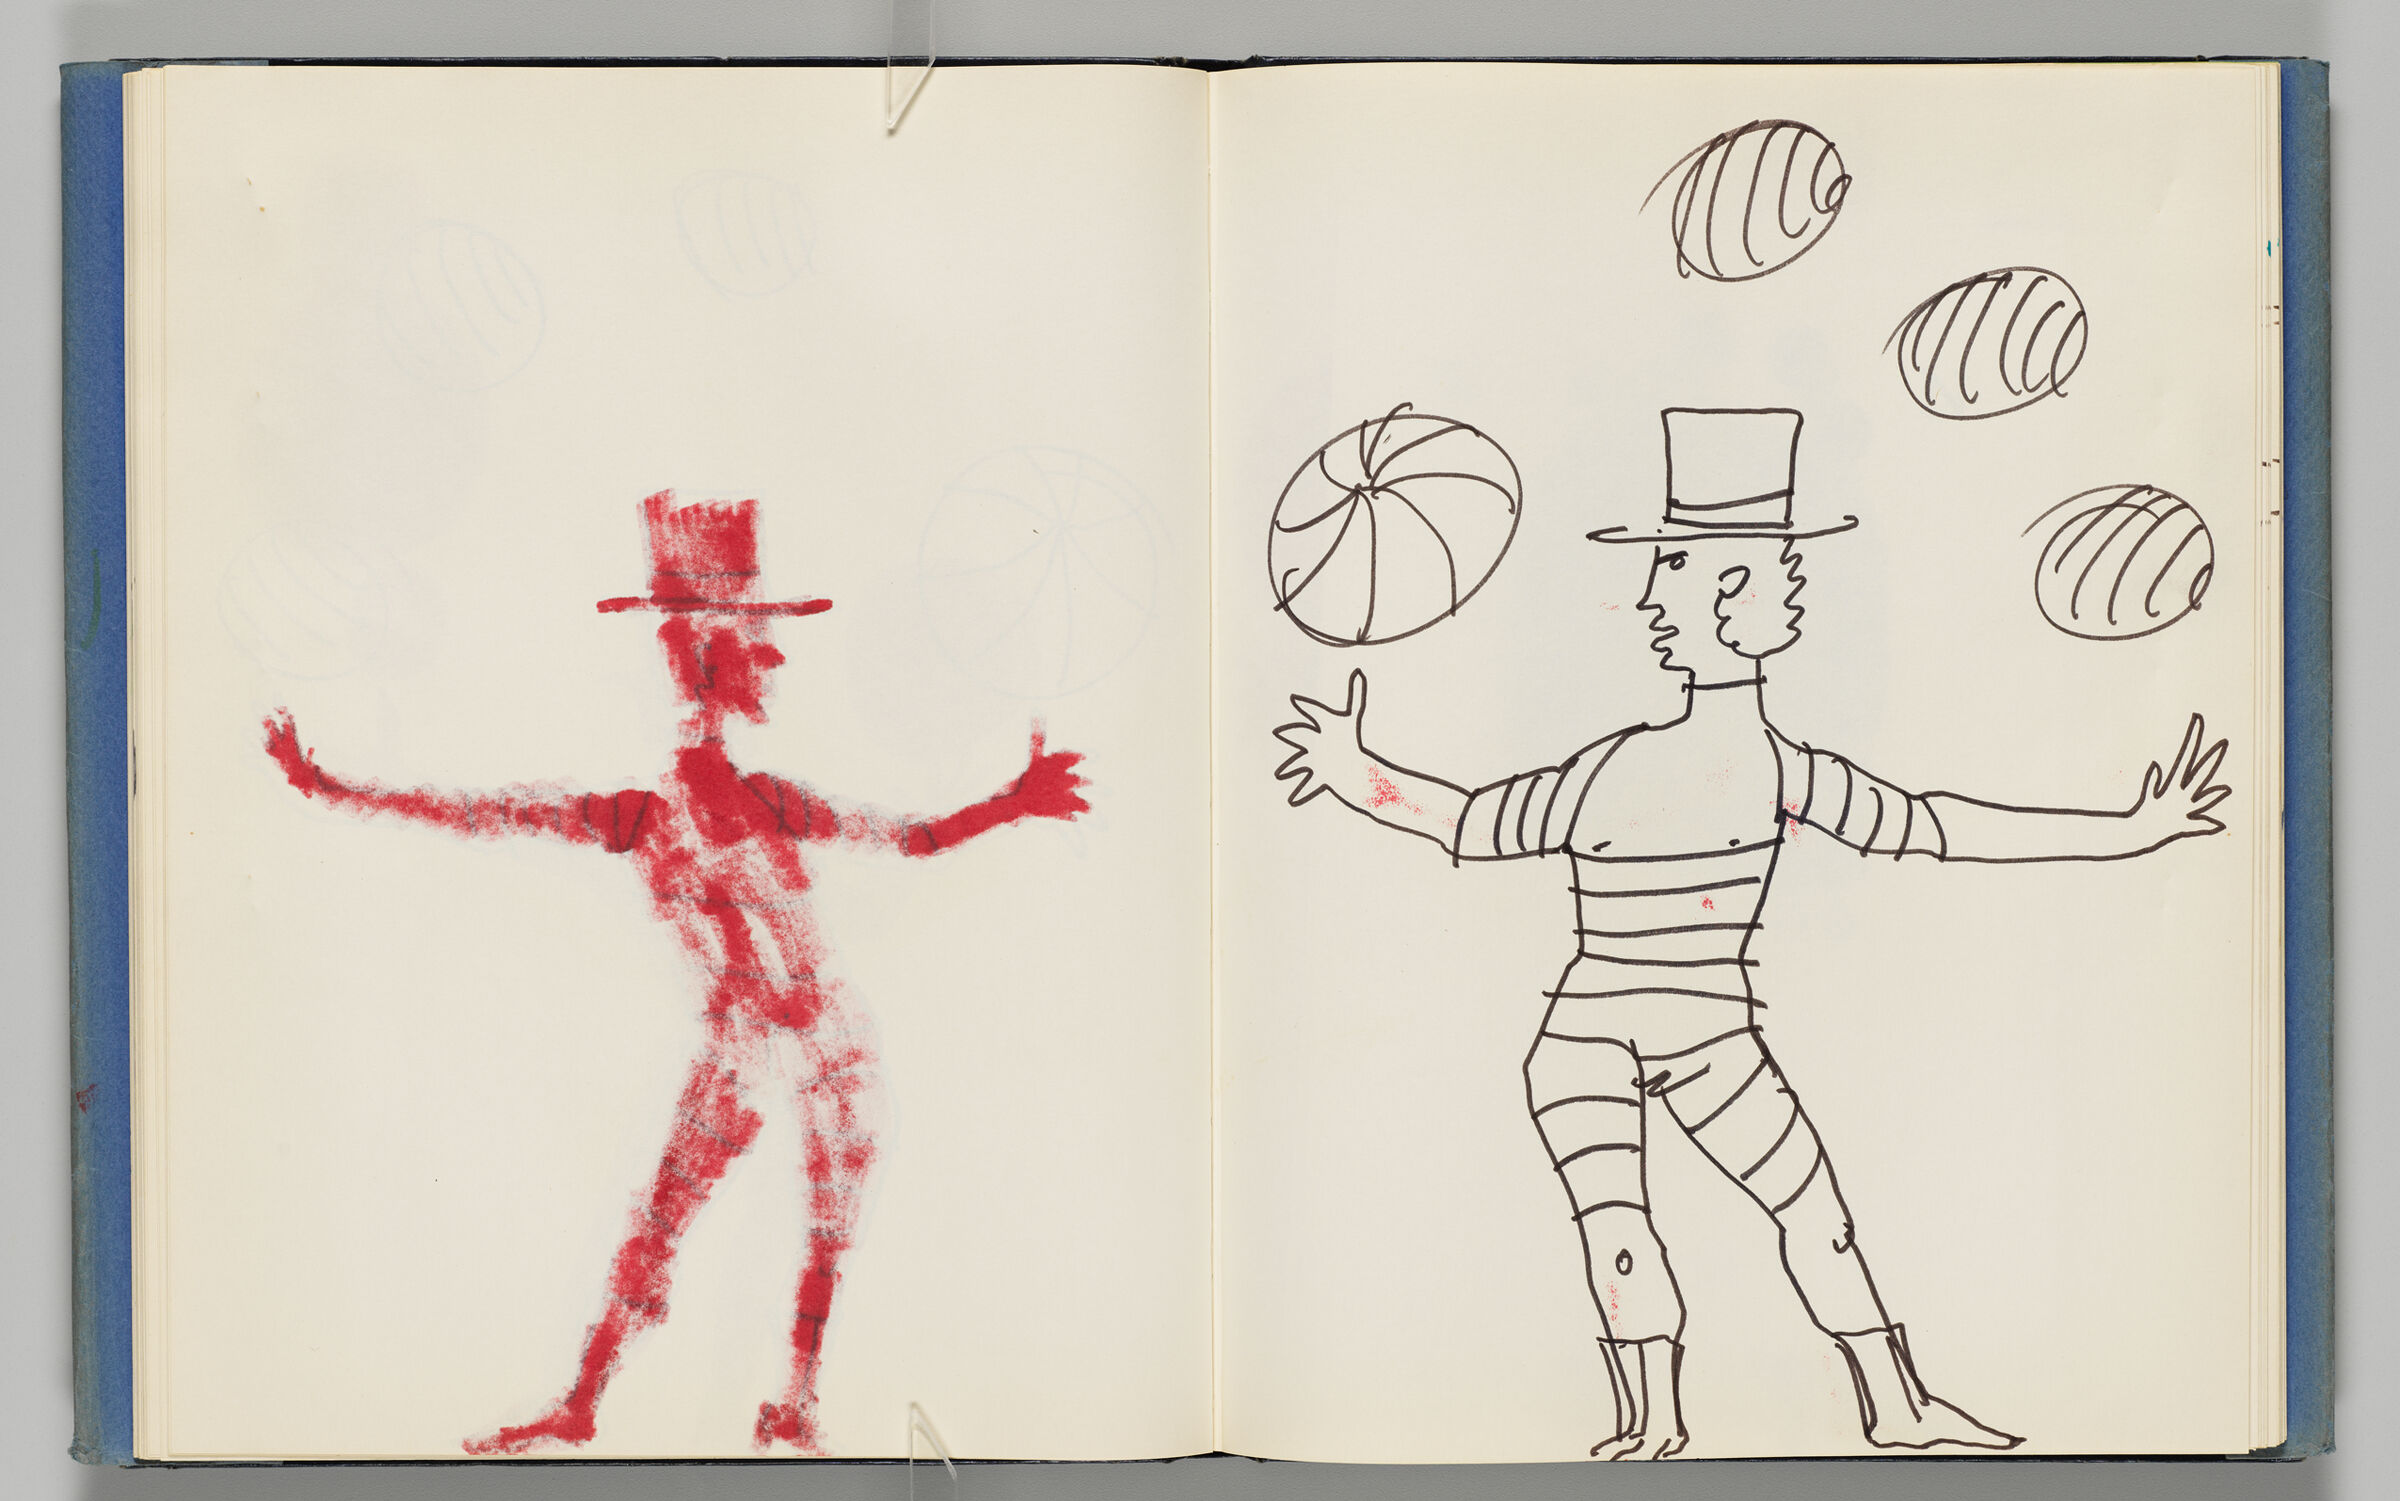 Untitled (Bleed-Through Of Previous Page, Left Page); Untitled (Juggler, Right Page)